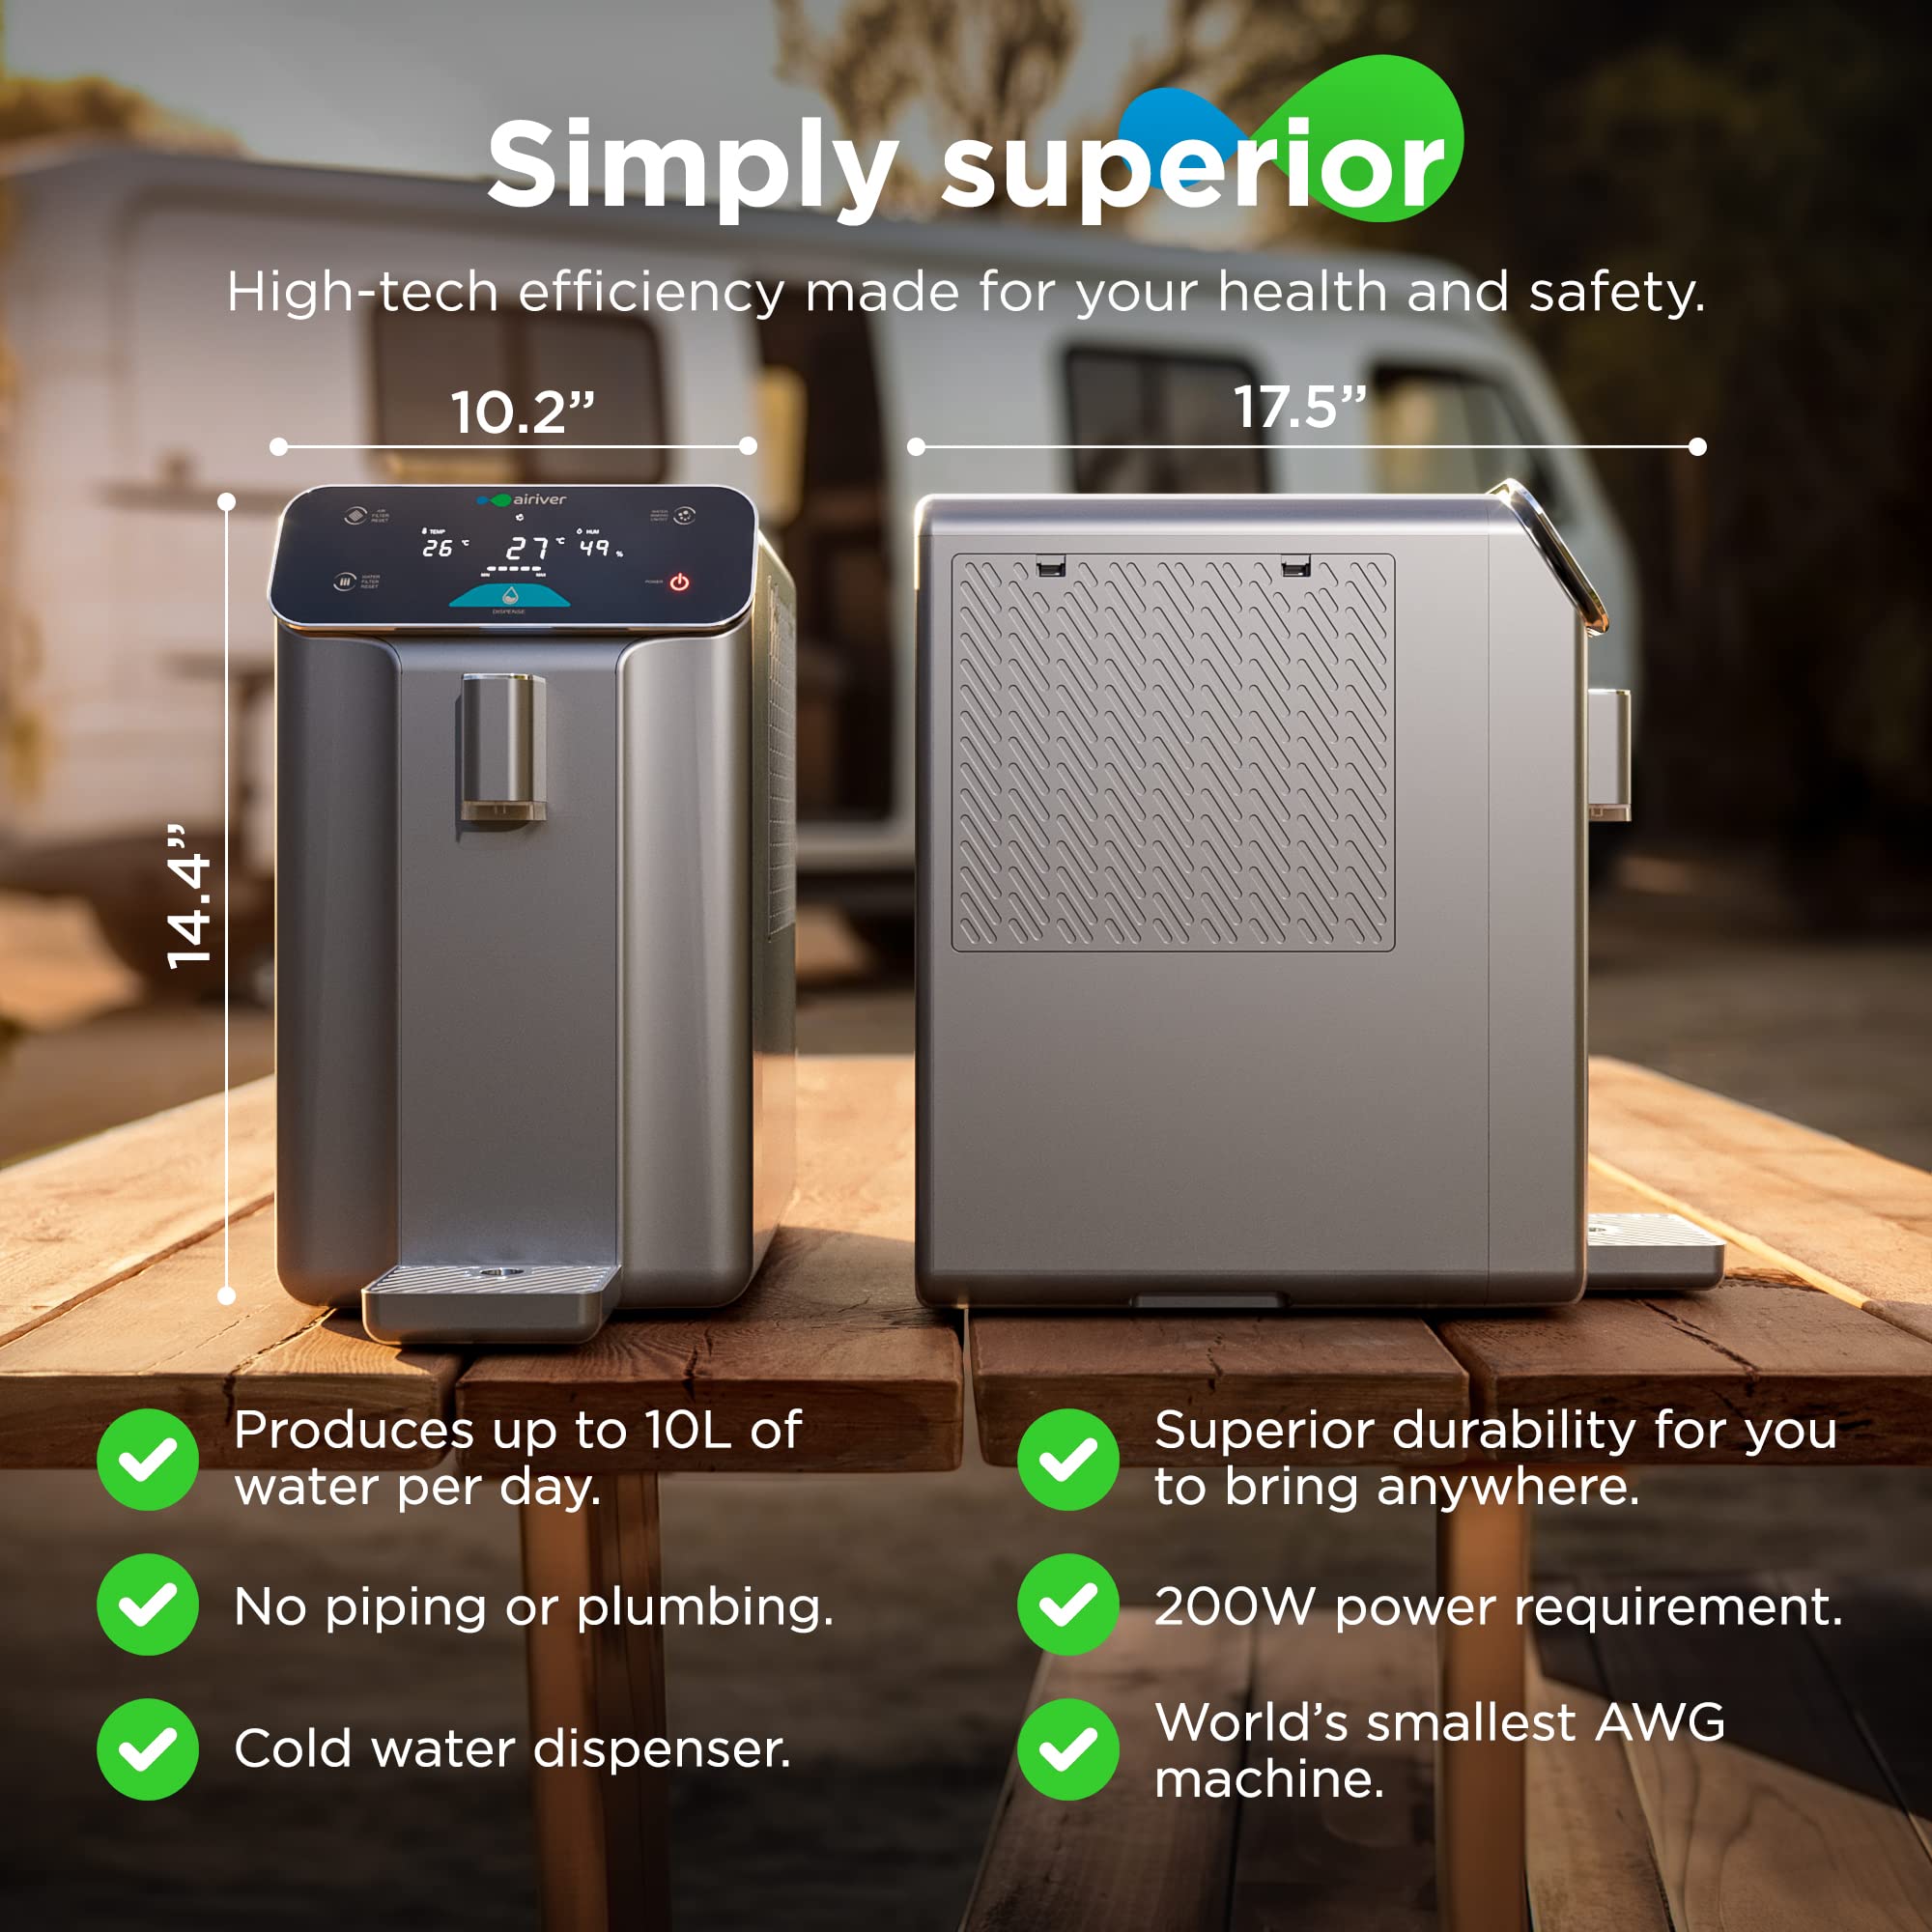 Airiver Worlds Smallest 10L Family Atmospheric Water Generator - 2023 Award Winning DSGN - Portable Air to Water Generator - Van Life, Boat, Camping, Tiny House, Off Grid, Preppers, Silver